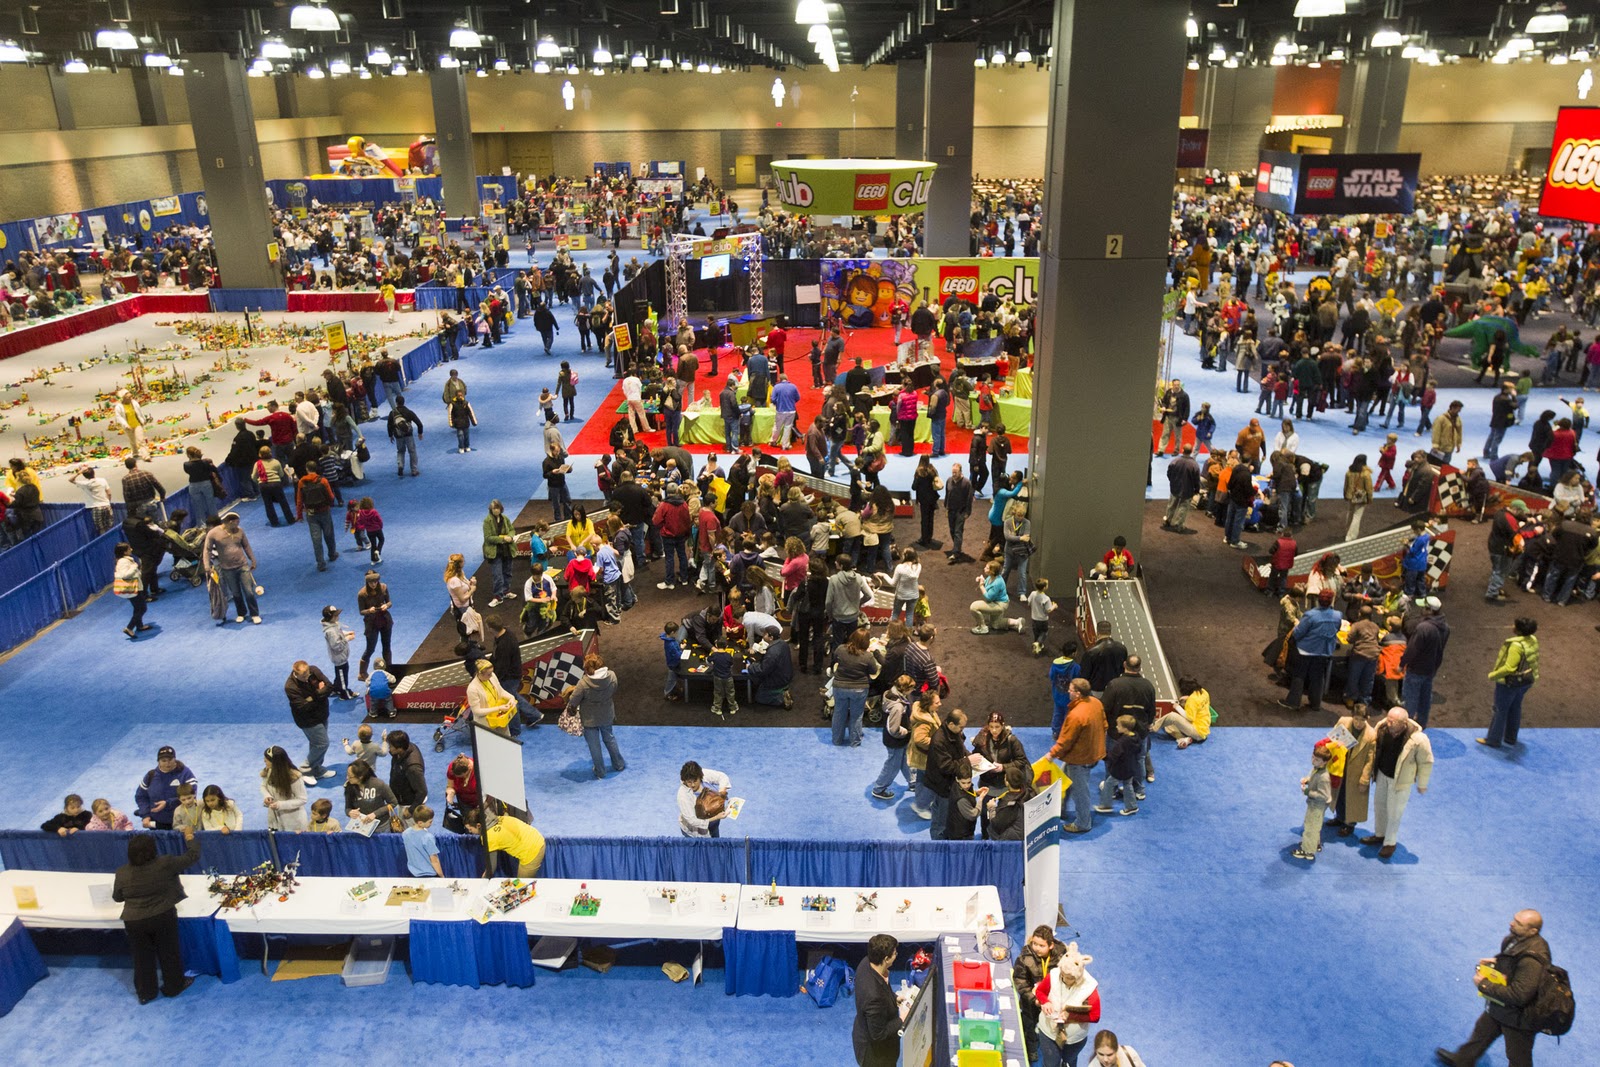 Hey Cleveland!  #LEGOKidsFest is Coming to the CLE November 4 - 6, 2011!